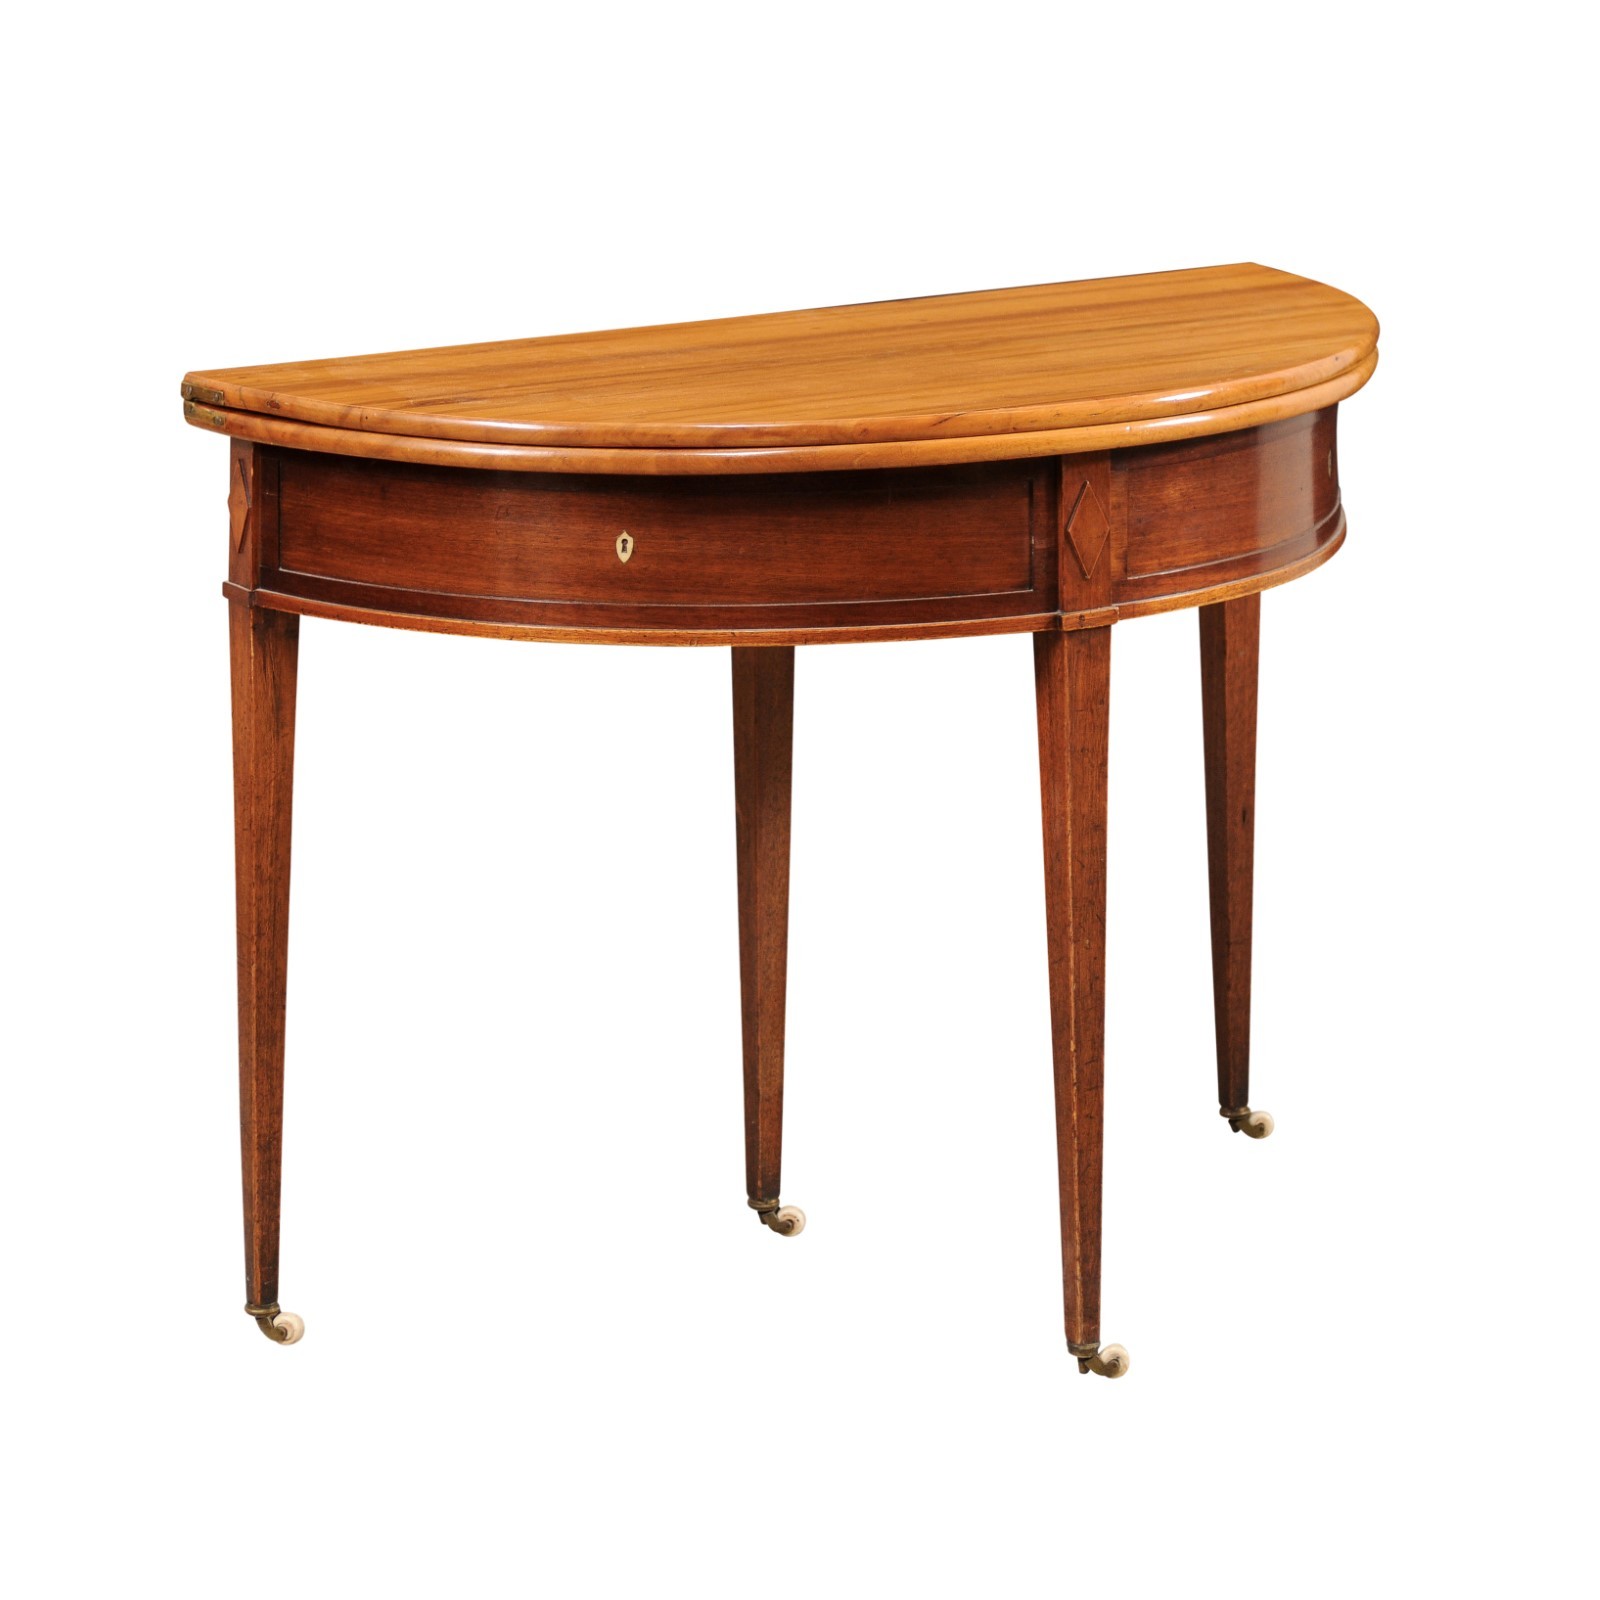 Early 19th C. French Demi-to-Round Table